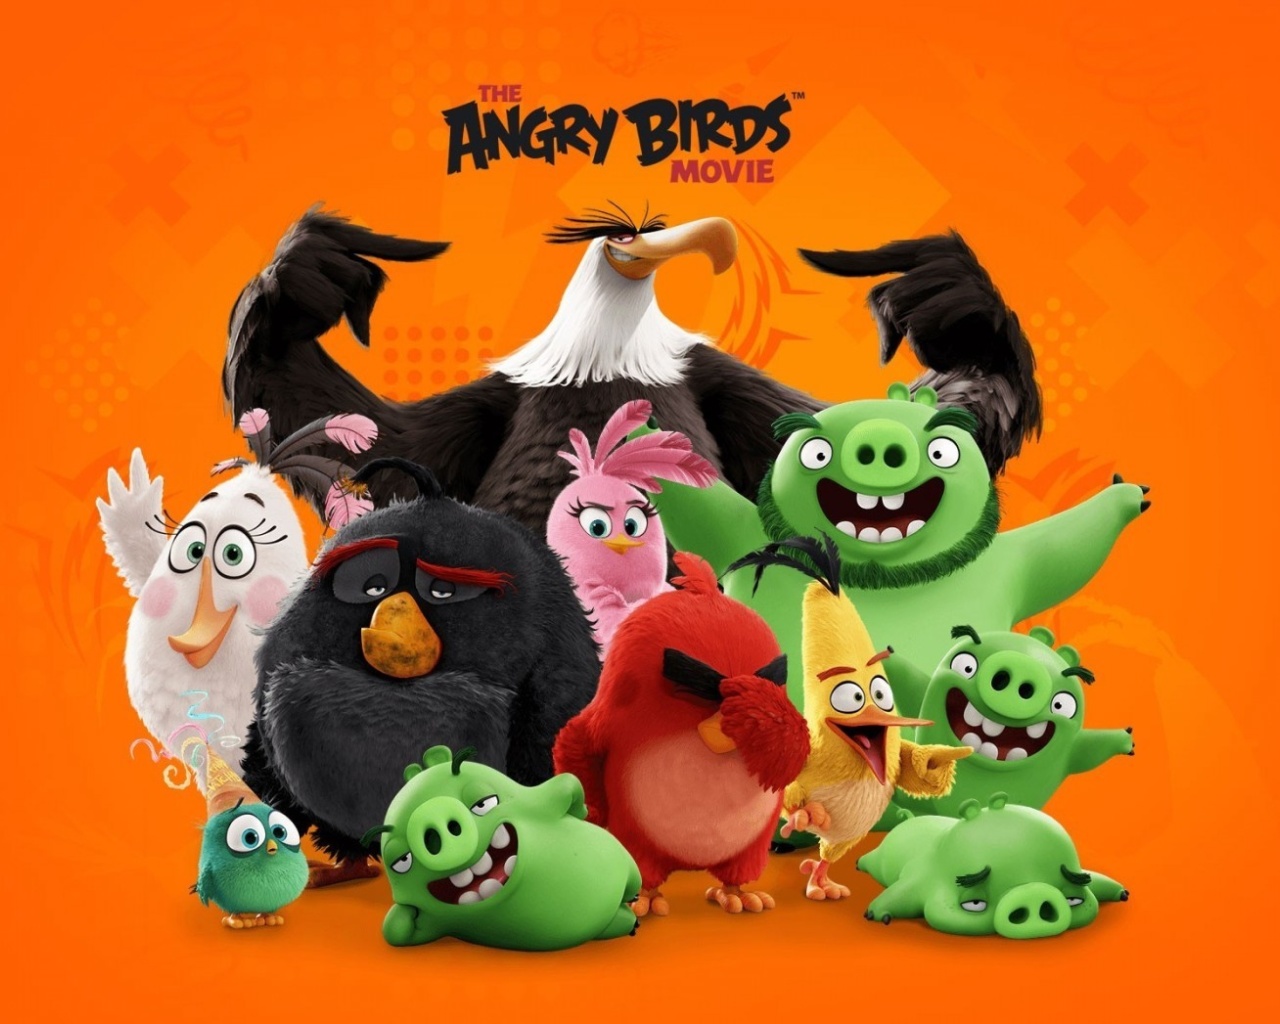 Angry Birds the Movie Release by Rovio screenshot #1 1280x1024